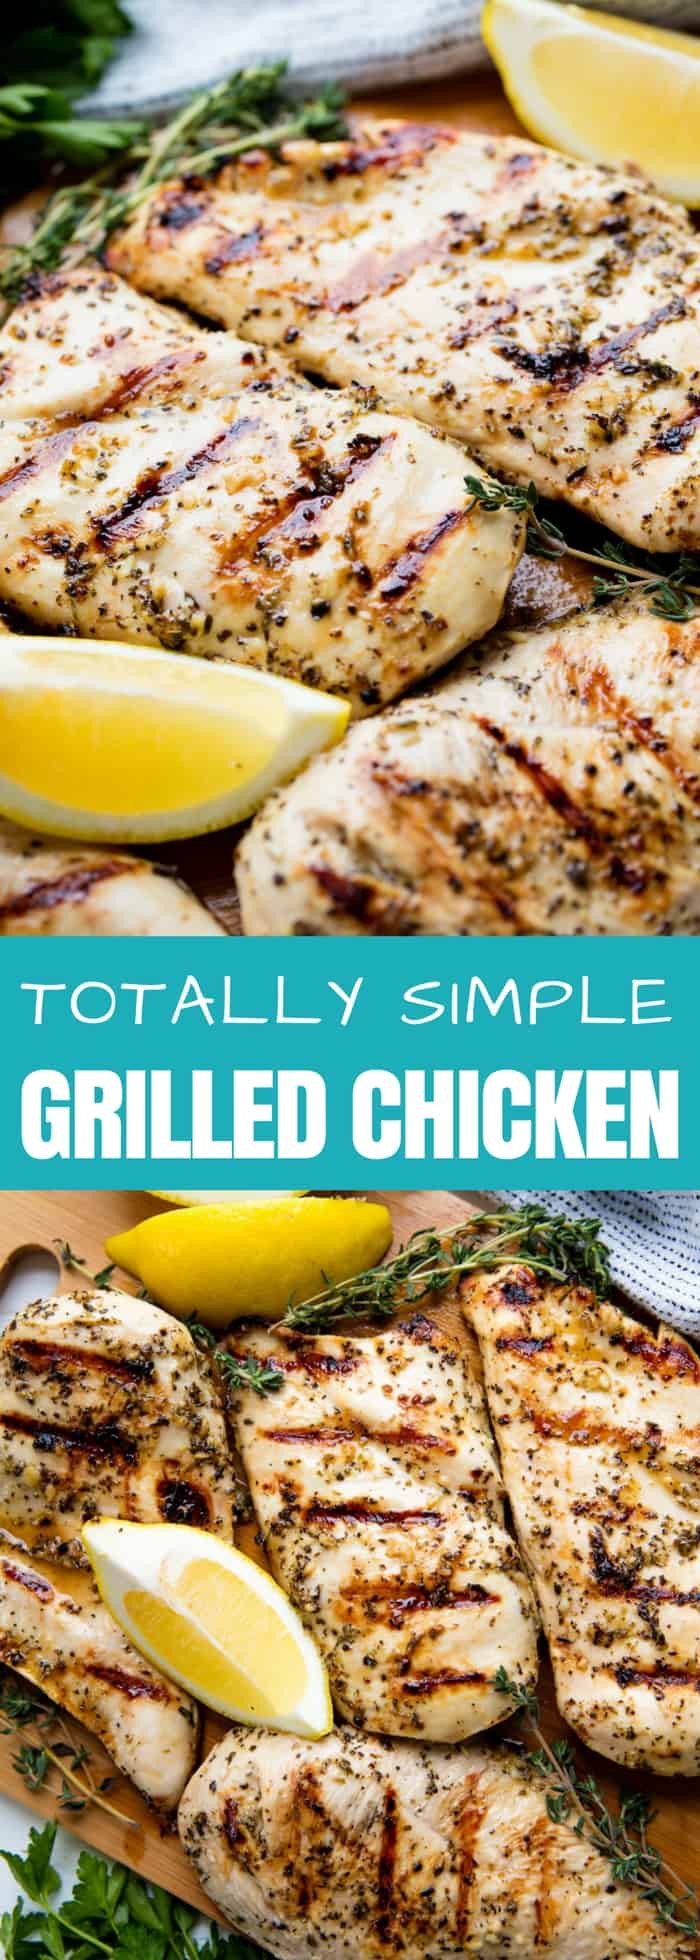 This Simple Grilled Chicken Recipe has a lemon, garlic, and herb marinade that makes for the absolute best grilled chicken. You'll make this recipe again and again!